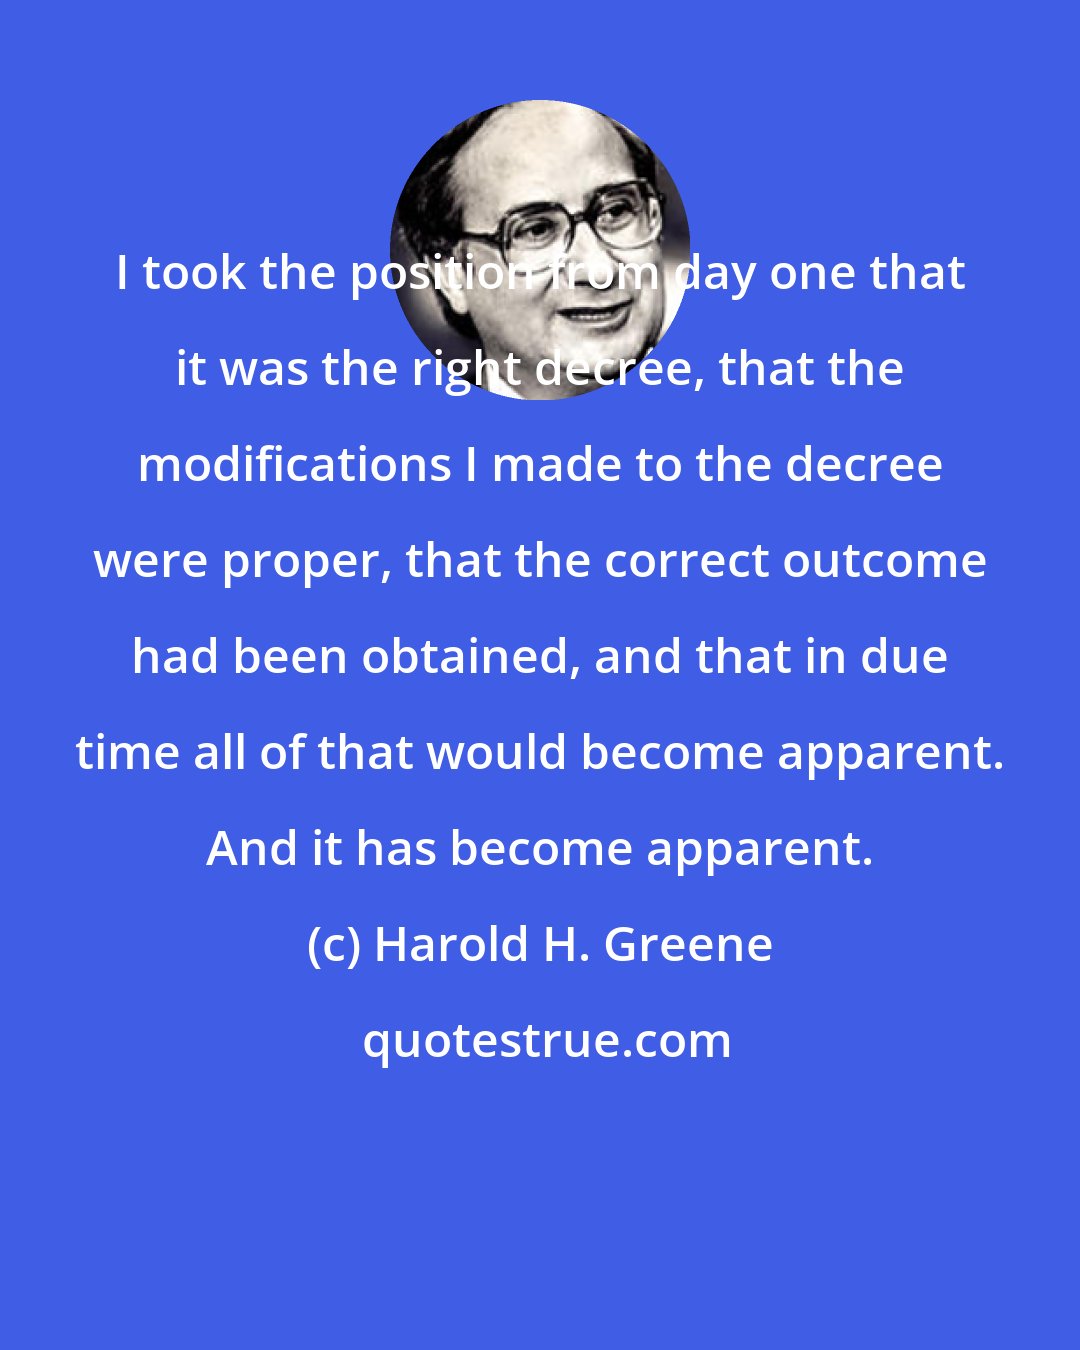 Harold H. Greene: I took the position from day one that it was the right decree, that the modifications I made to the decree were proper, that the correct outcome had been obtained, and that in due time all of that would become apparent. And it has become apparent.